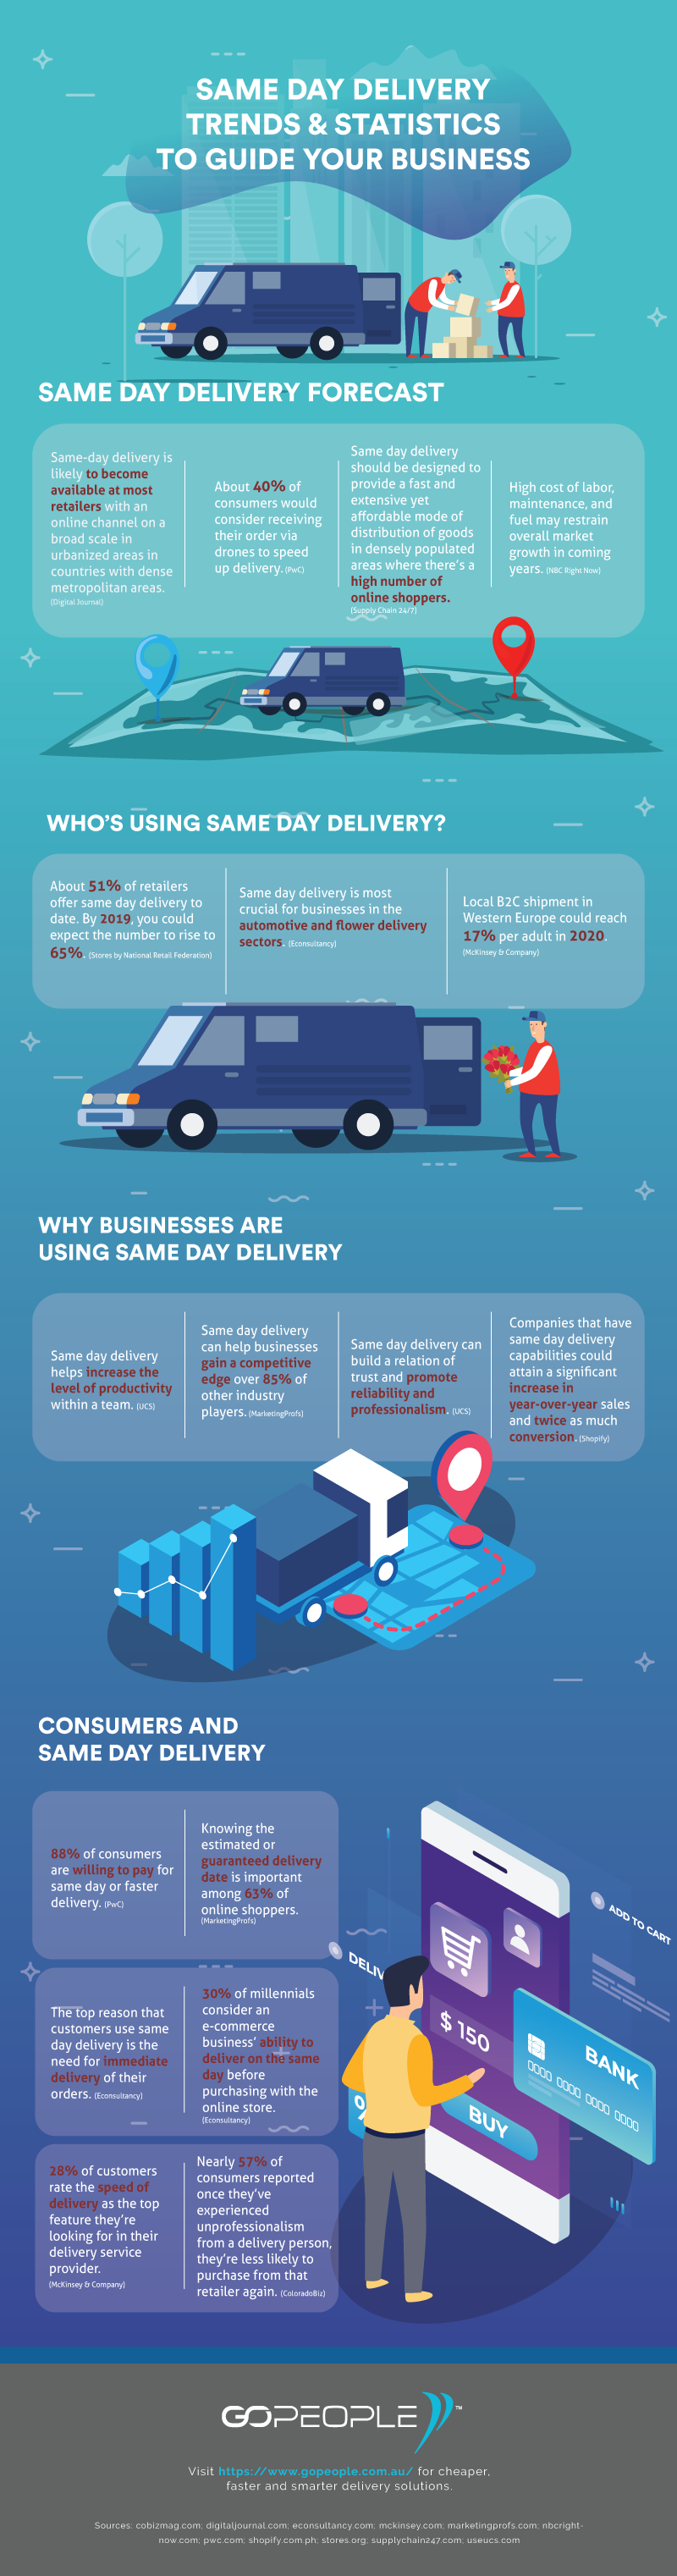 Same-Day-Delivery-Trends-and-Statistics-to-Guide-Your-Business-Infographic